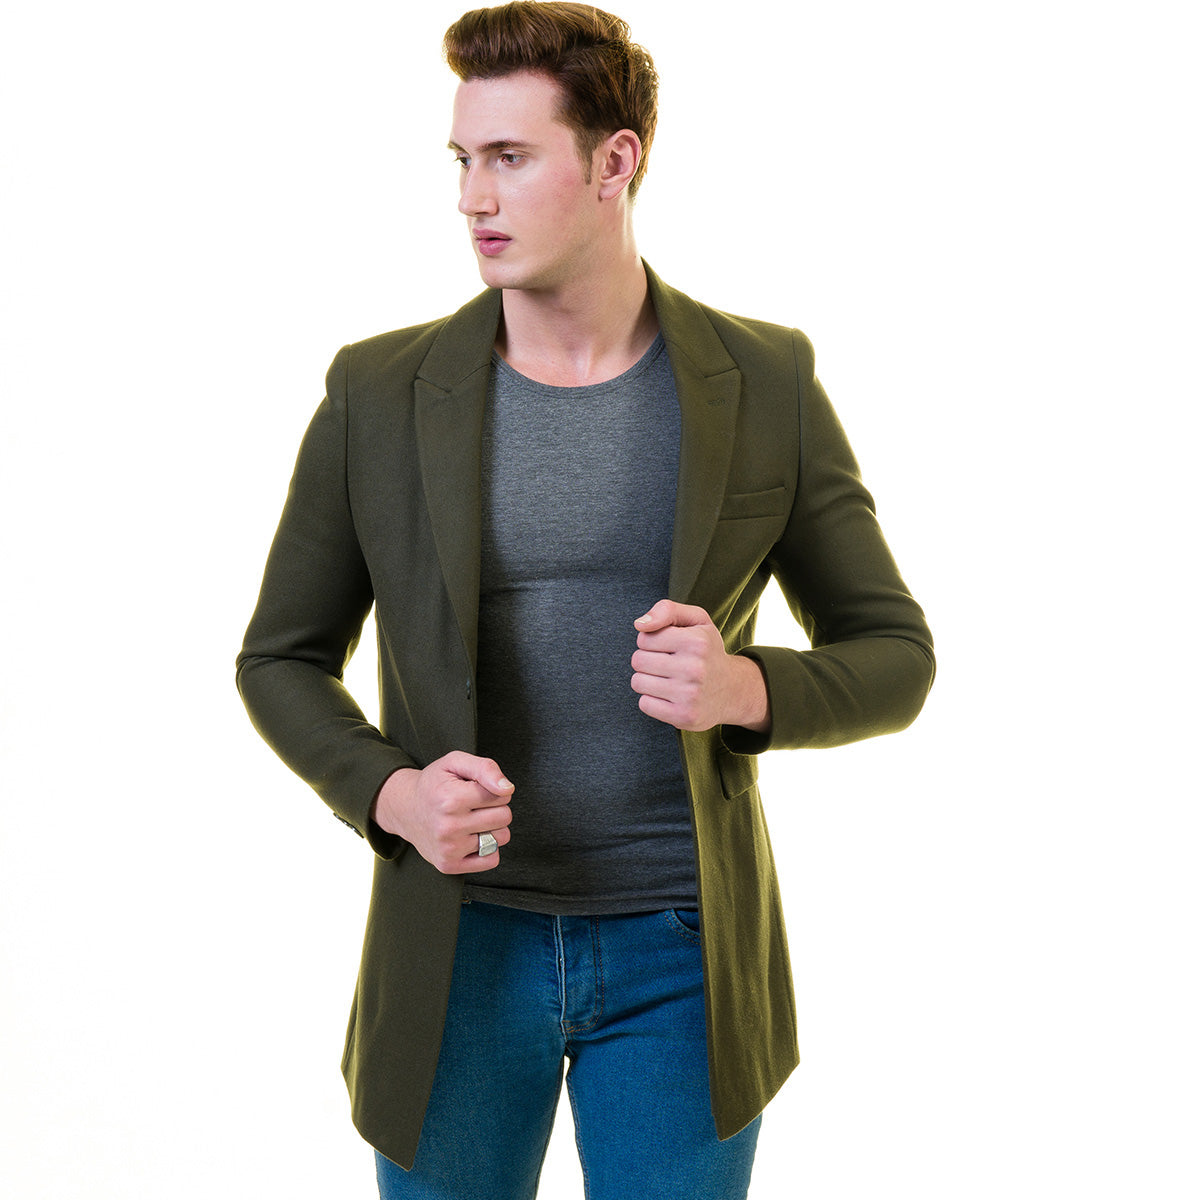 Tailored Coats Jackets Outerwear